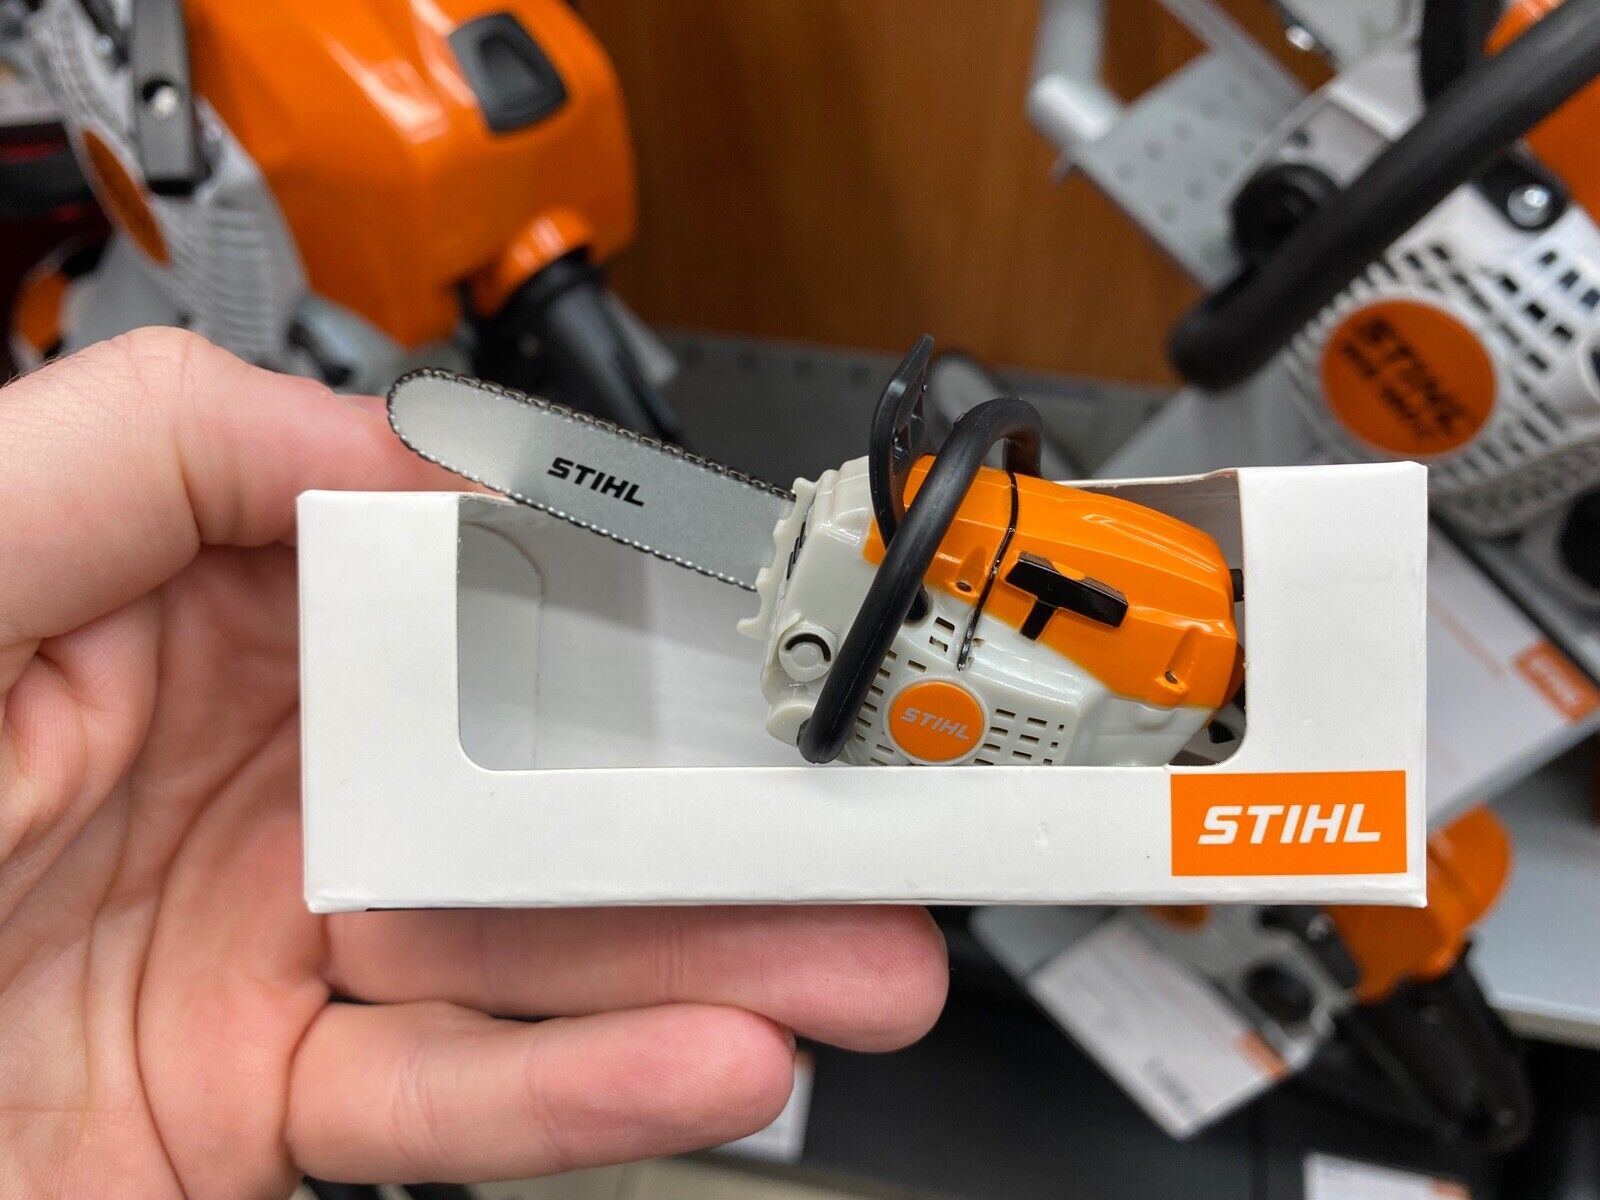 Stihl Chainsaw Key Ring Keychain Battery Operated with Saw Sound 0420 960 0003